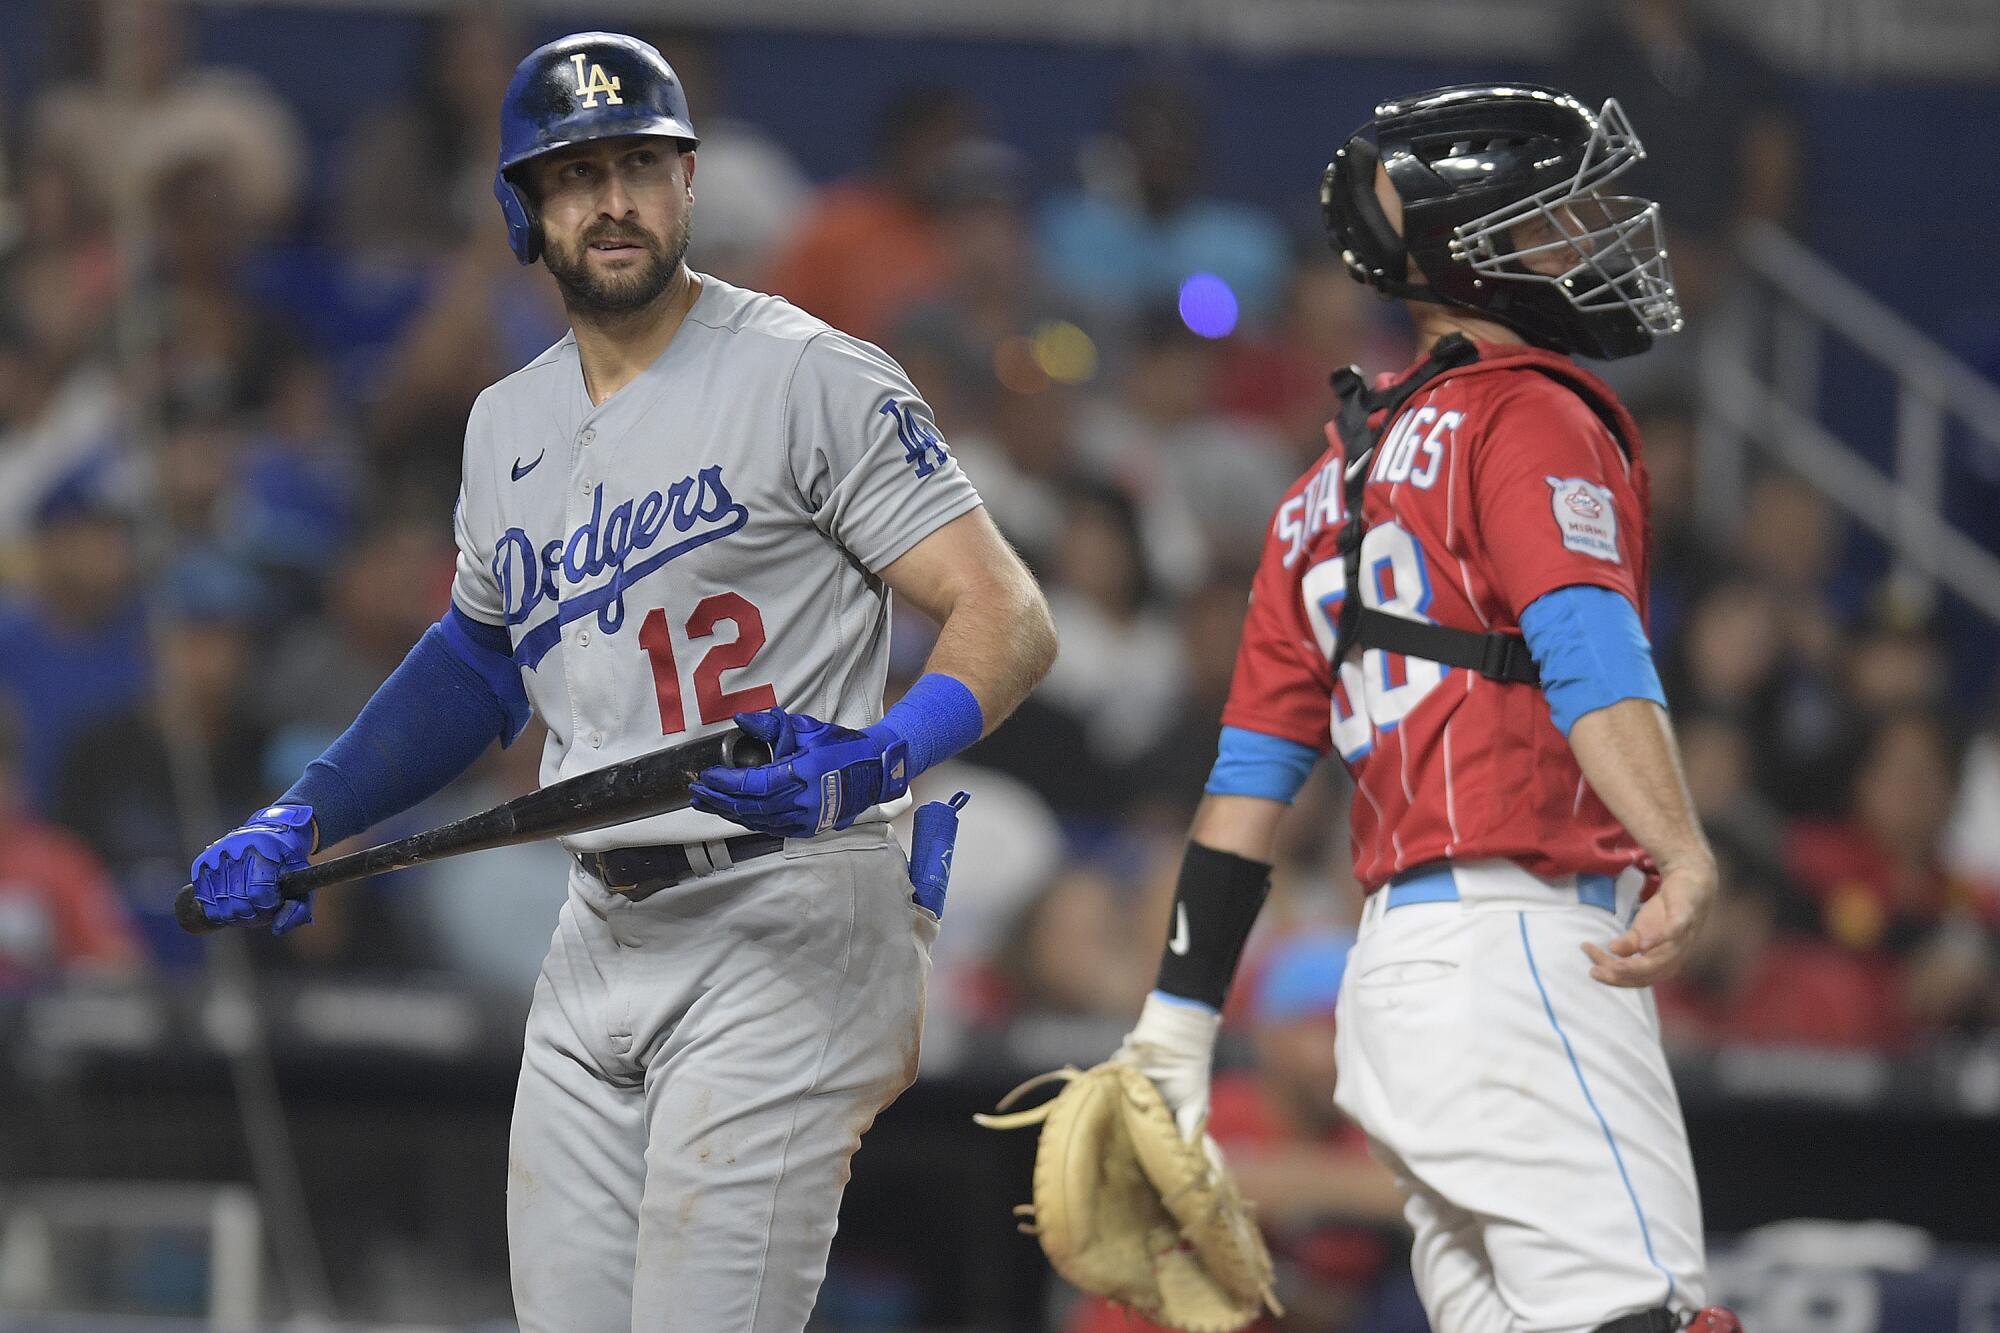 Dodgers batter Joey Gallo walks past Miami Marlins catcher Jacob Stallings after striking out.